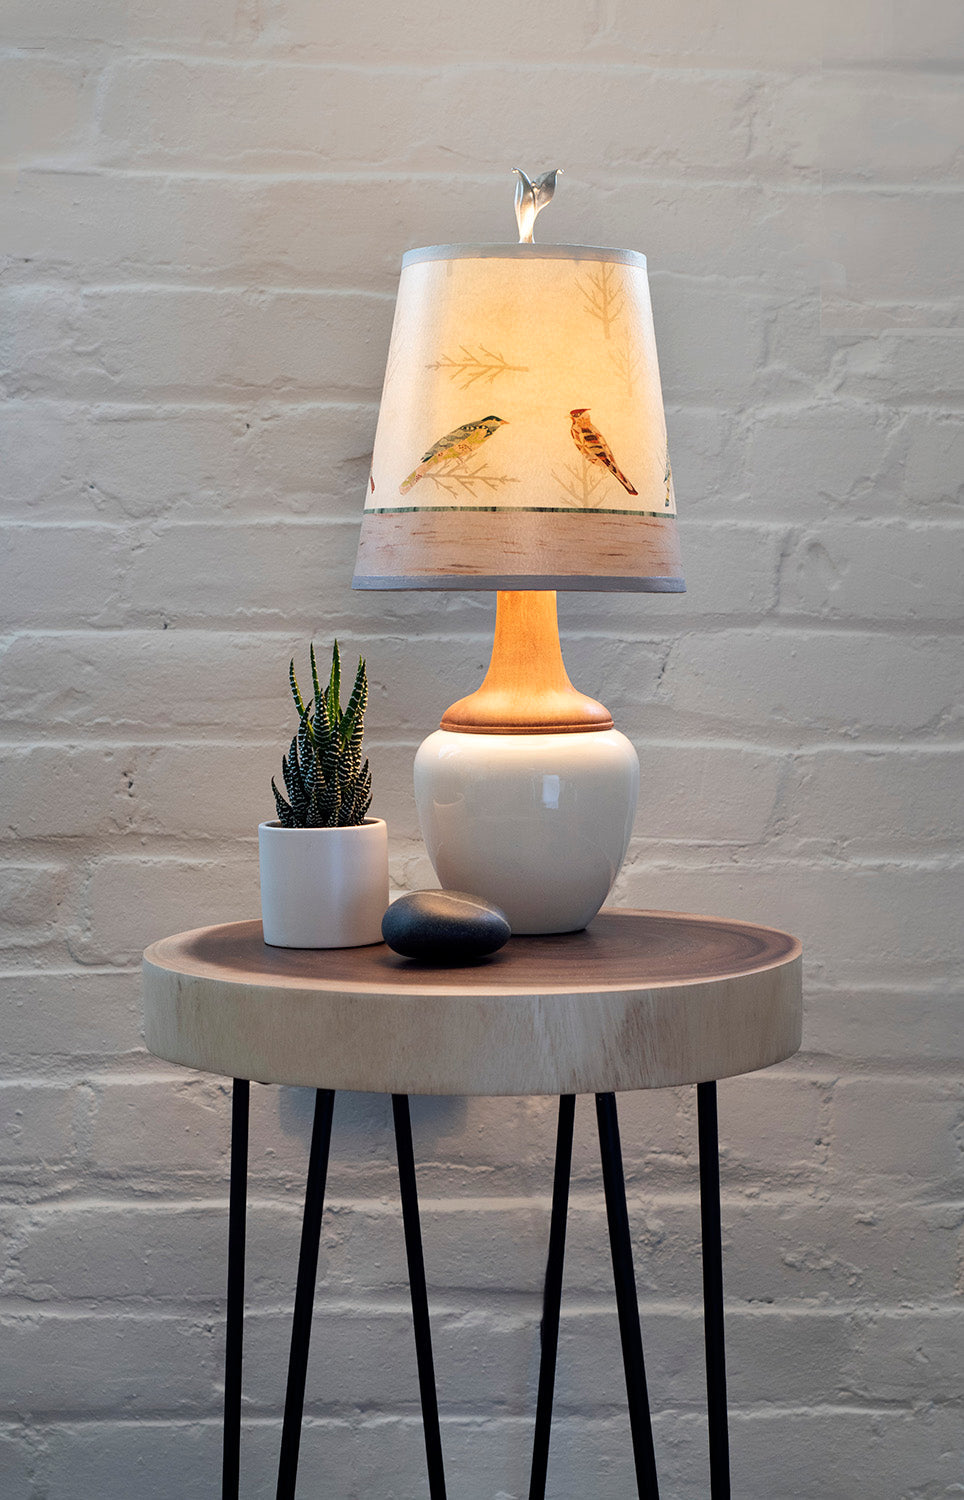 Janna Ugone & Co Ceramic and Maple Table Lamp in Ivory Gloss with Small Drum Shade in Bird Friends